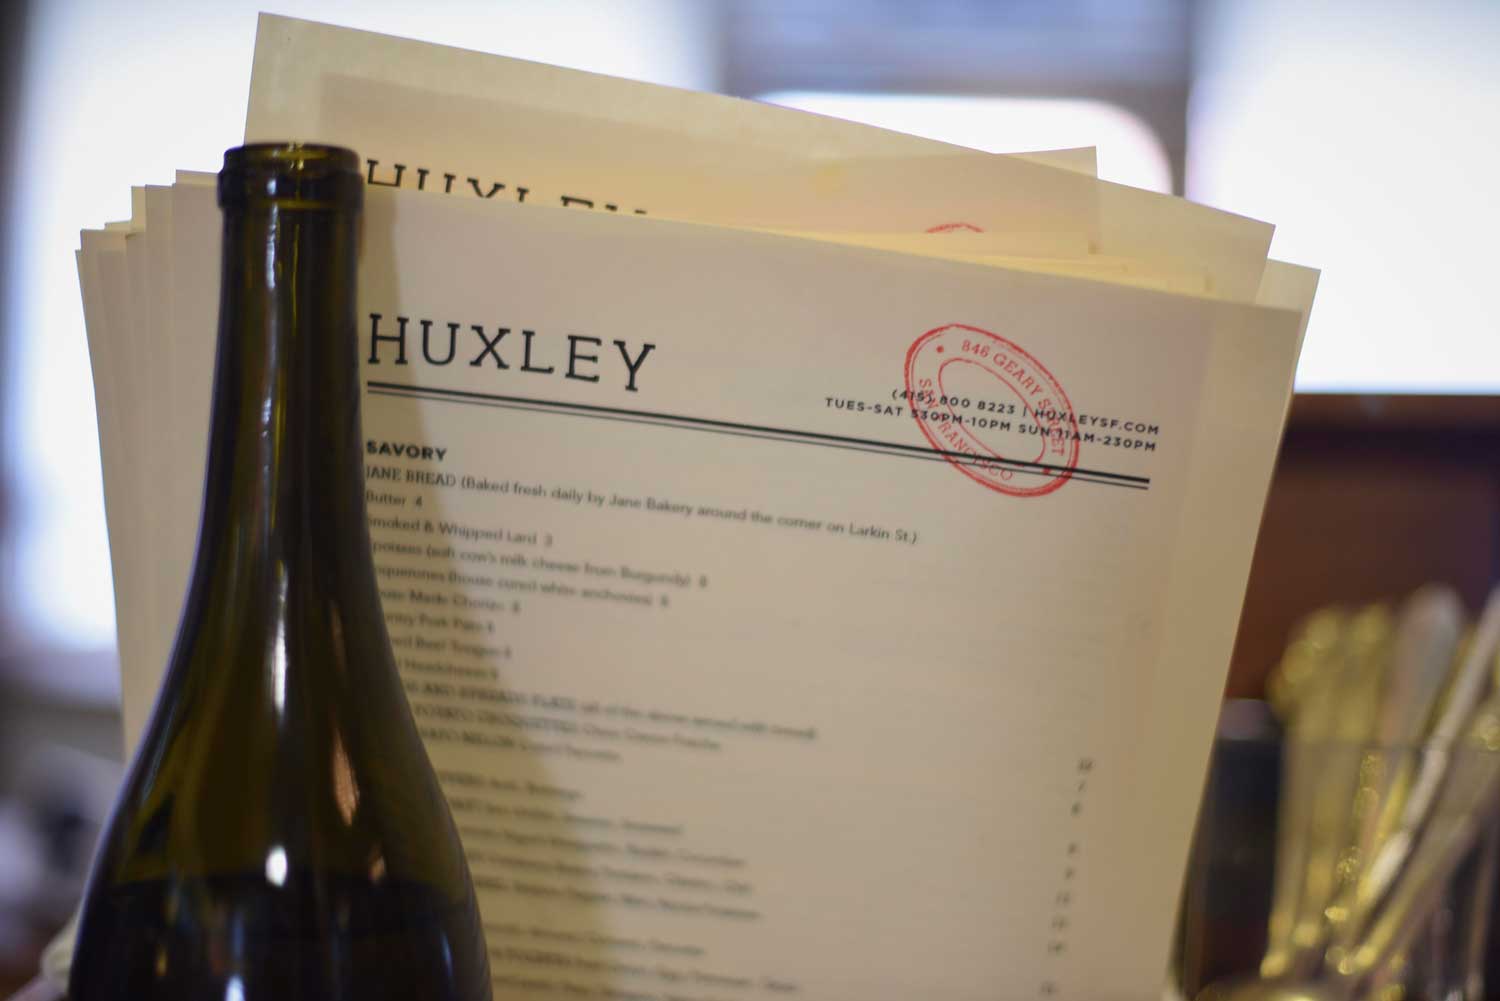 The Huxley menu changes with the seasons.